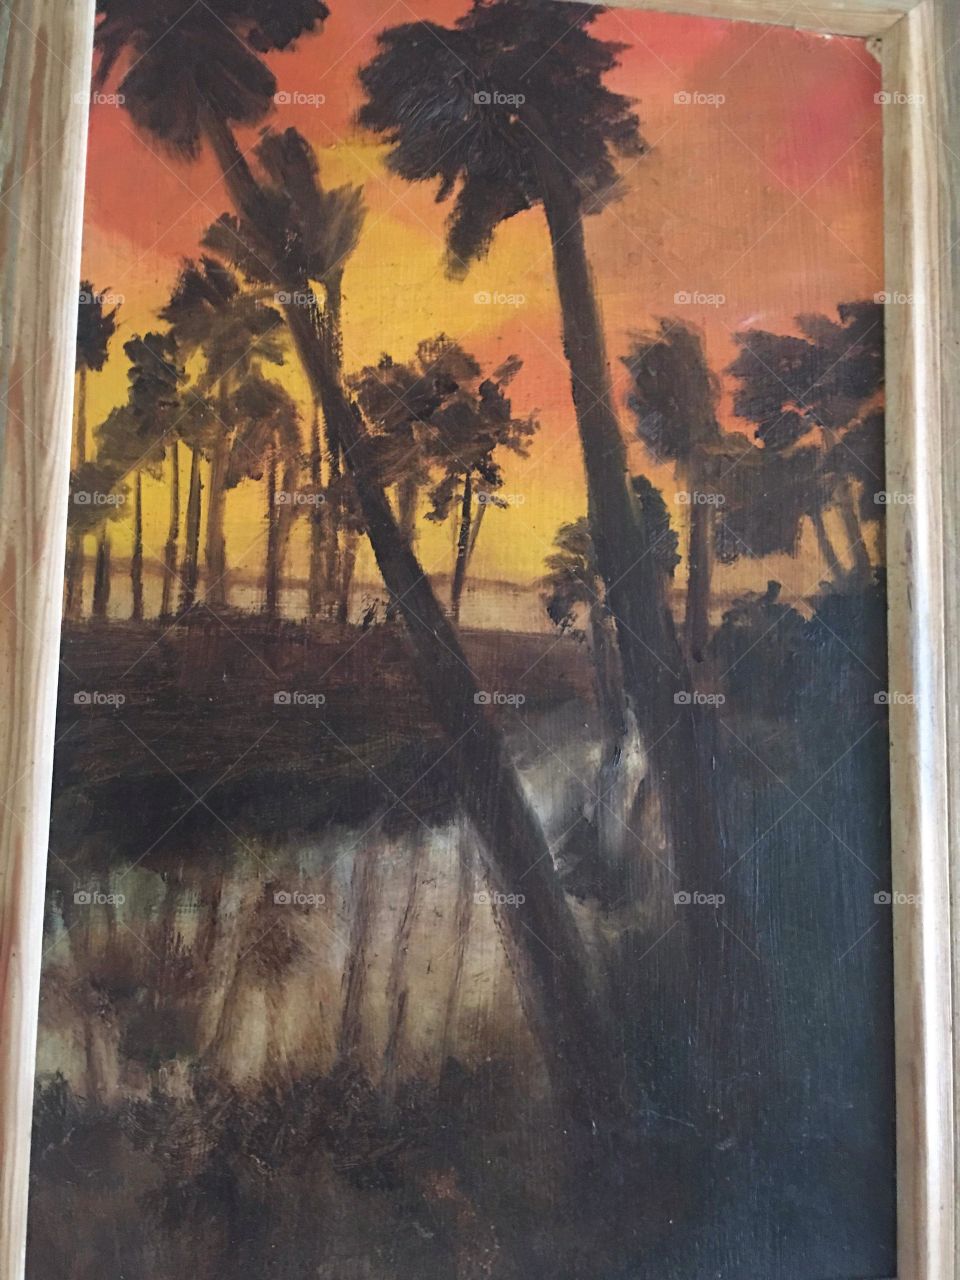 Oil painting of palm trees in South Florida silhouetted at sunset and reflected in still water off ocean 